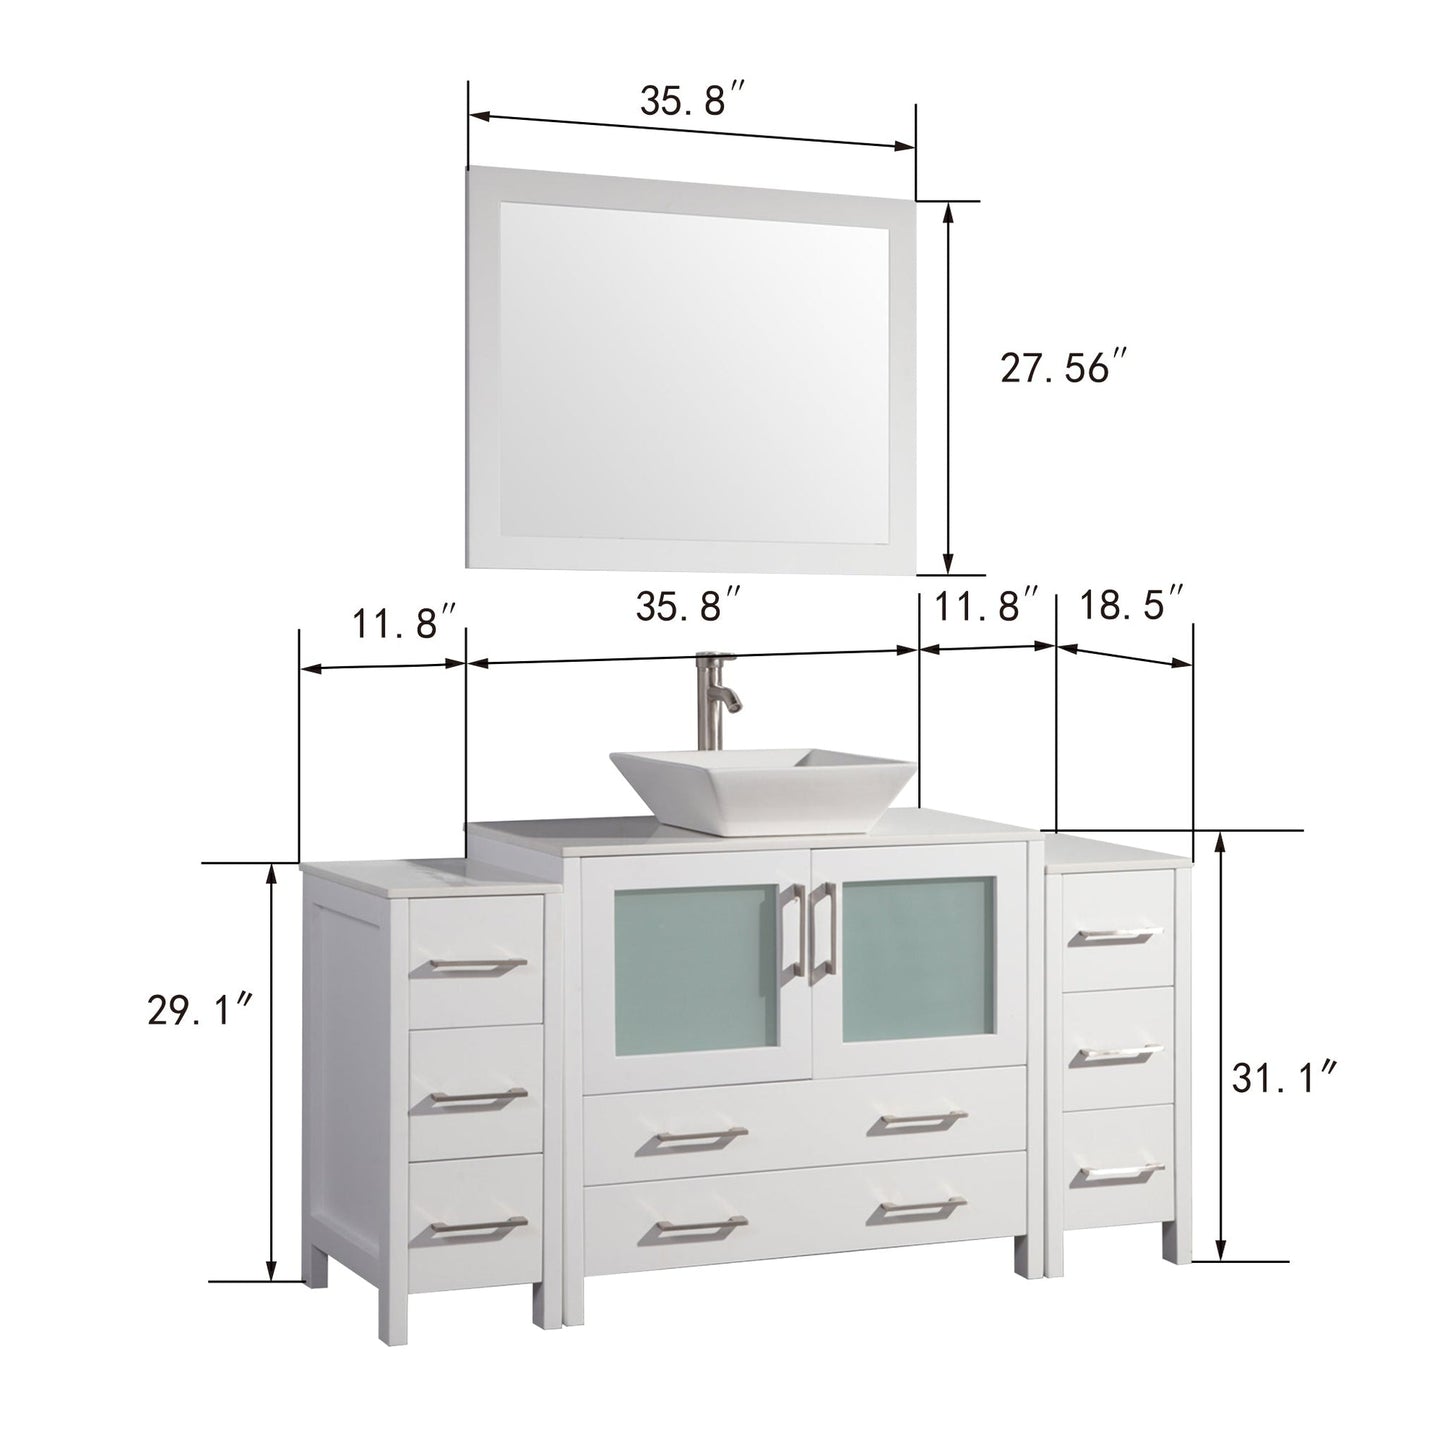 Vanity Art Ravenna 60" Single White Freestanding Vanity Set With White Engineered Marble Top, Ceramic Vessel Sink, 2 Side Cabinets and Mirror